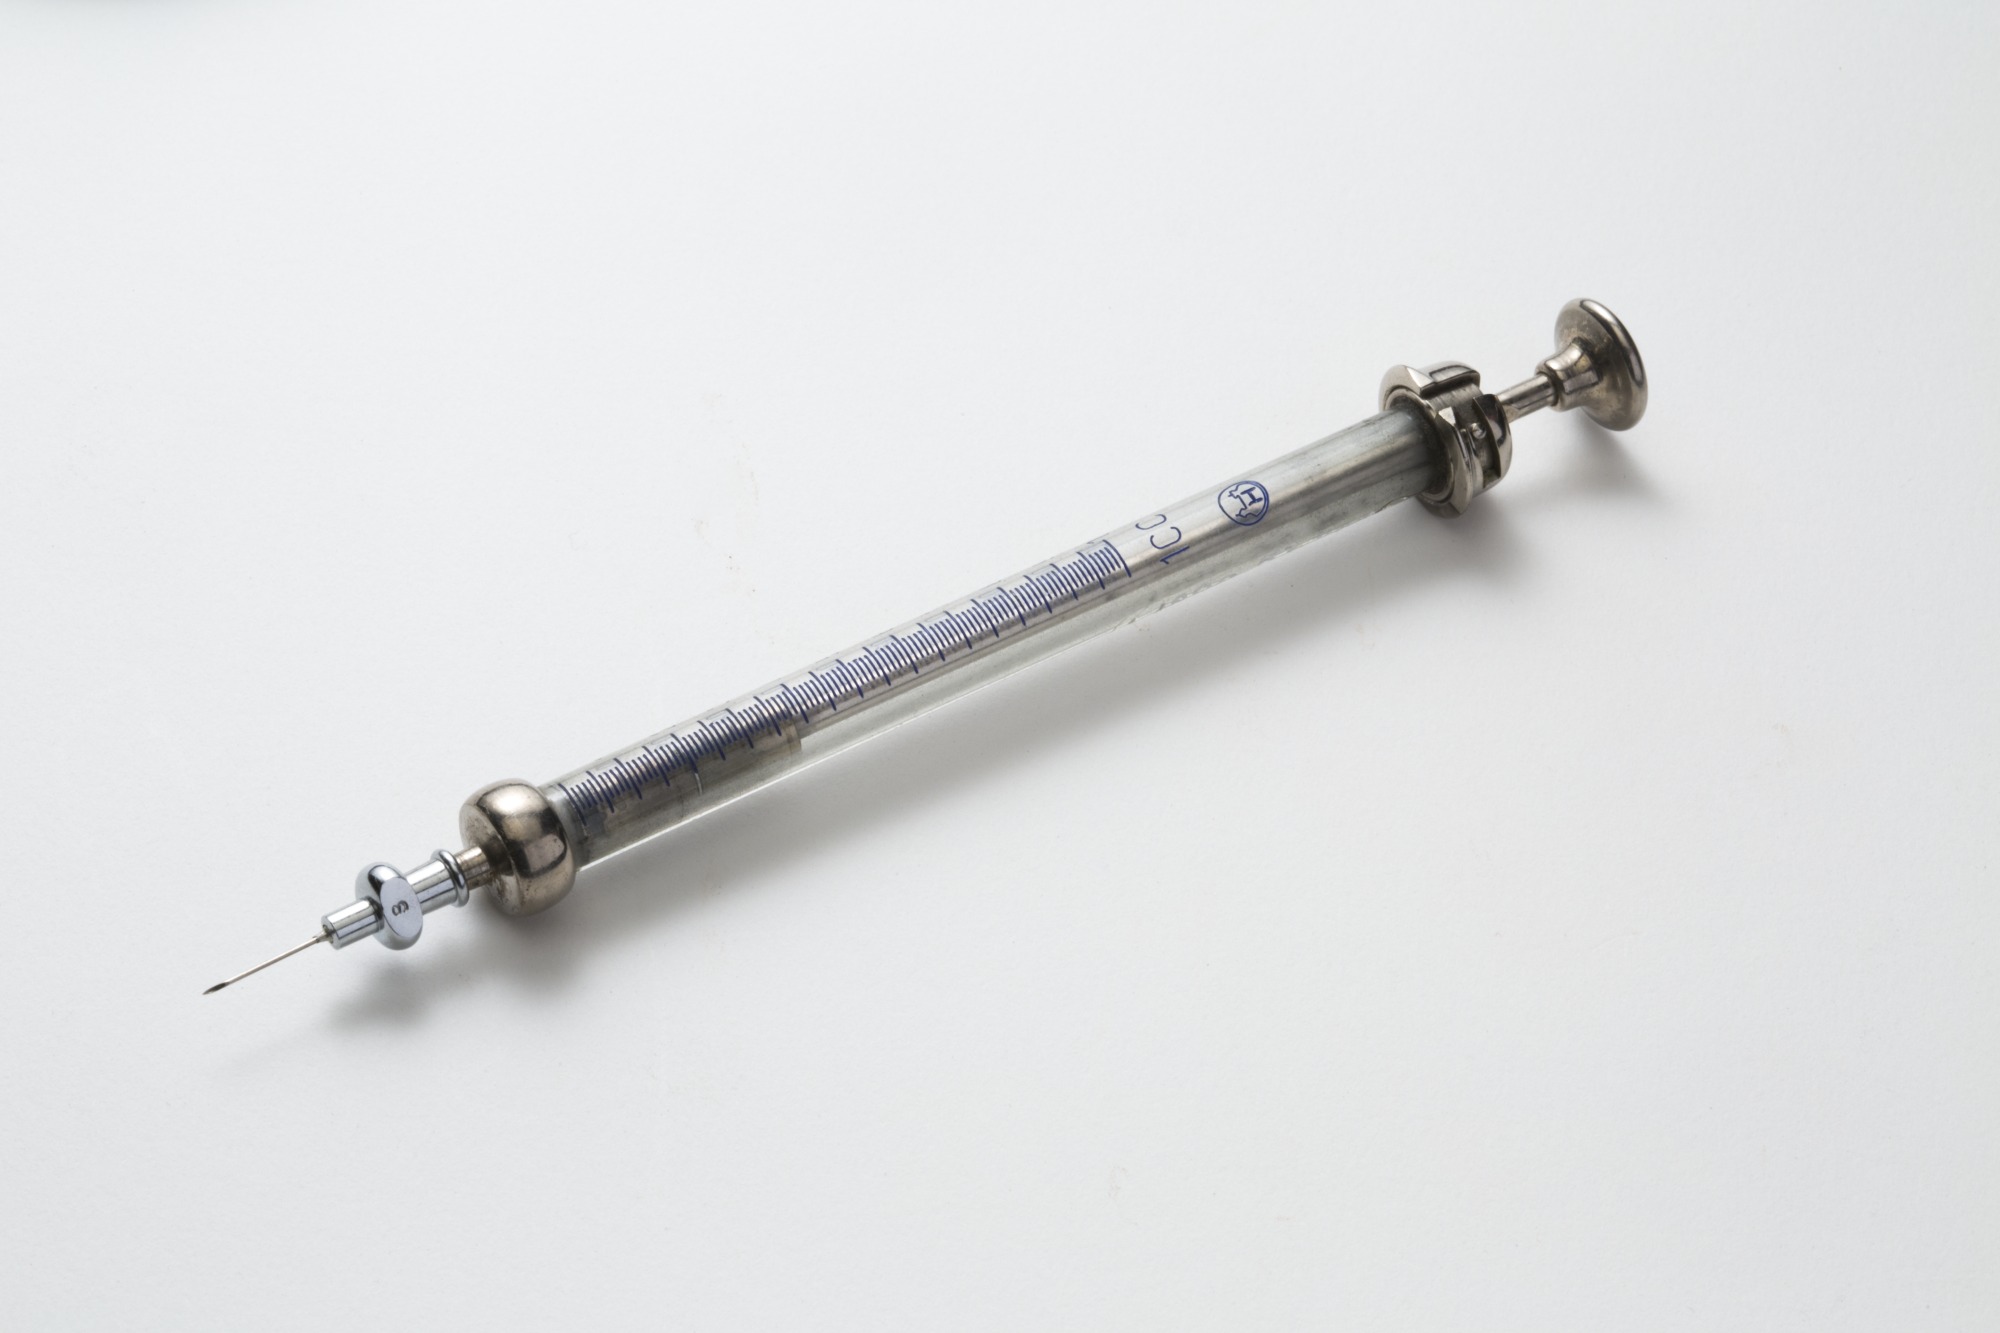 Syringe used in myxomatosis trials at Lake Urana, New South Wales in 1954.